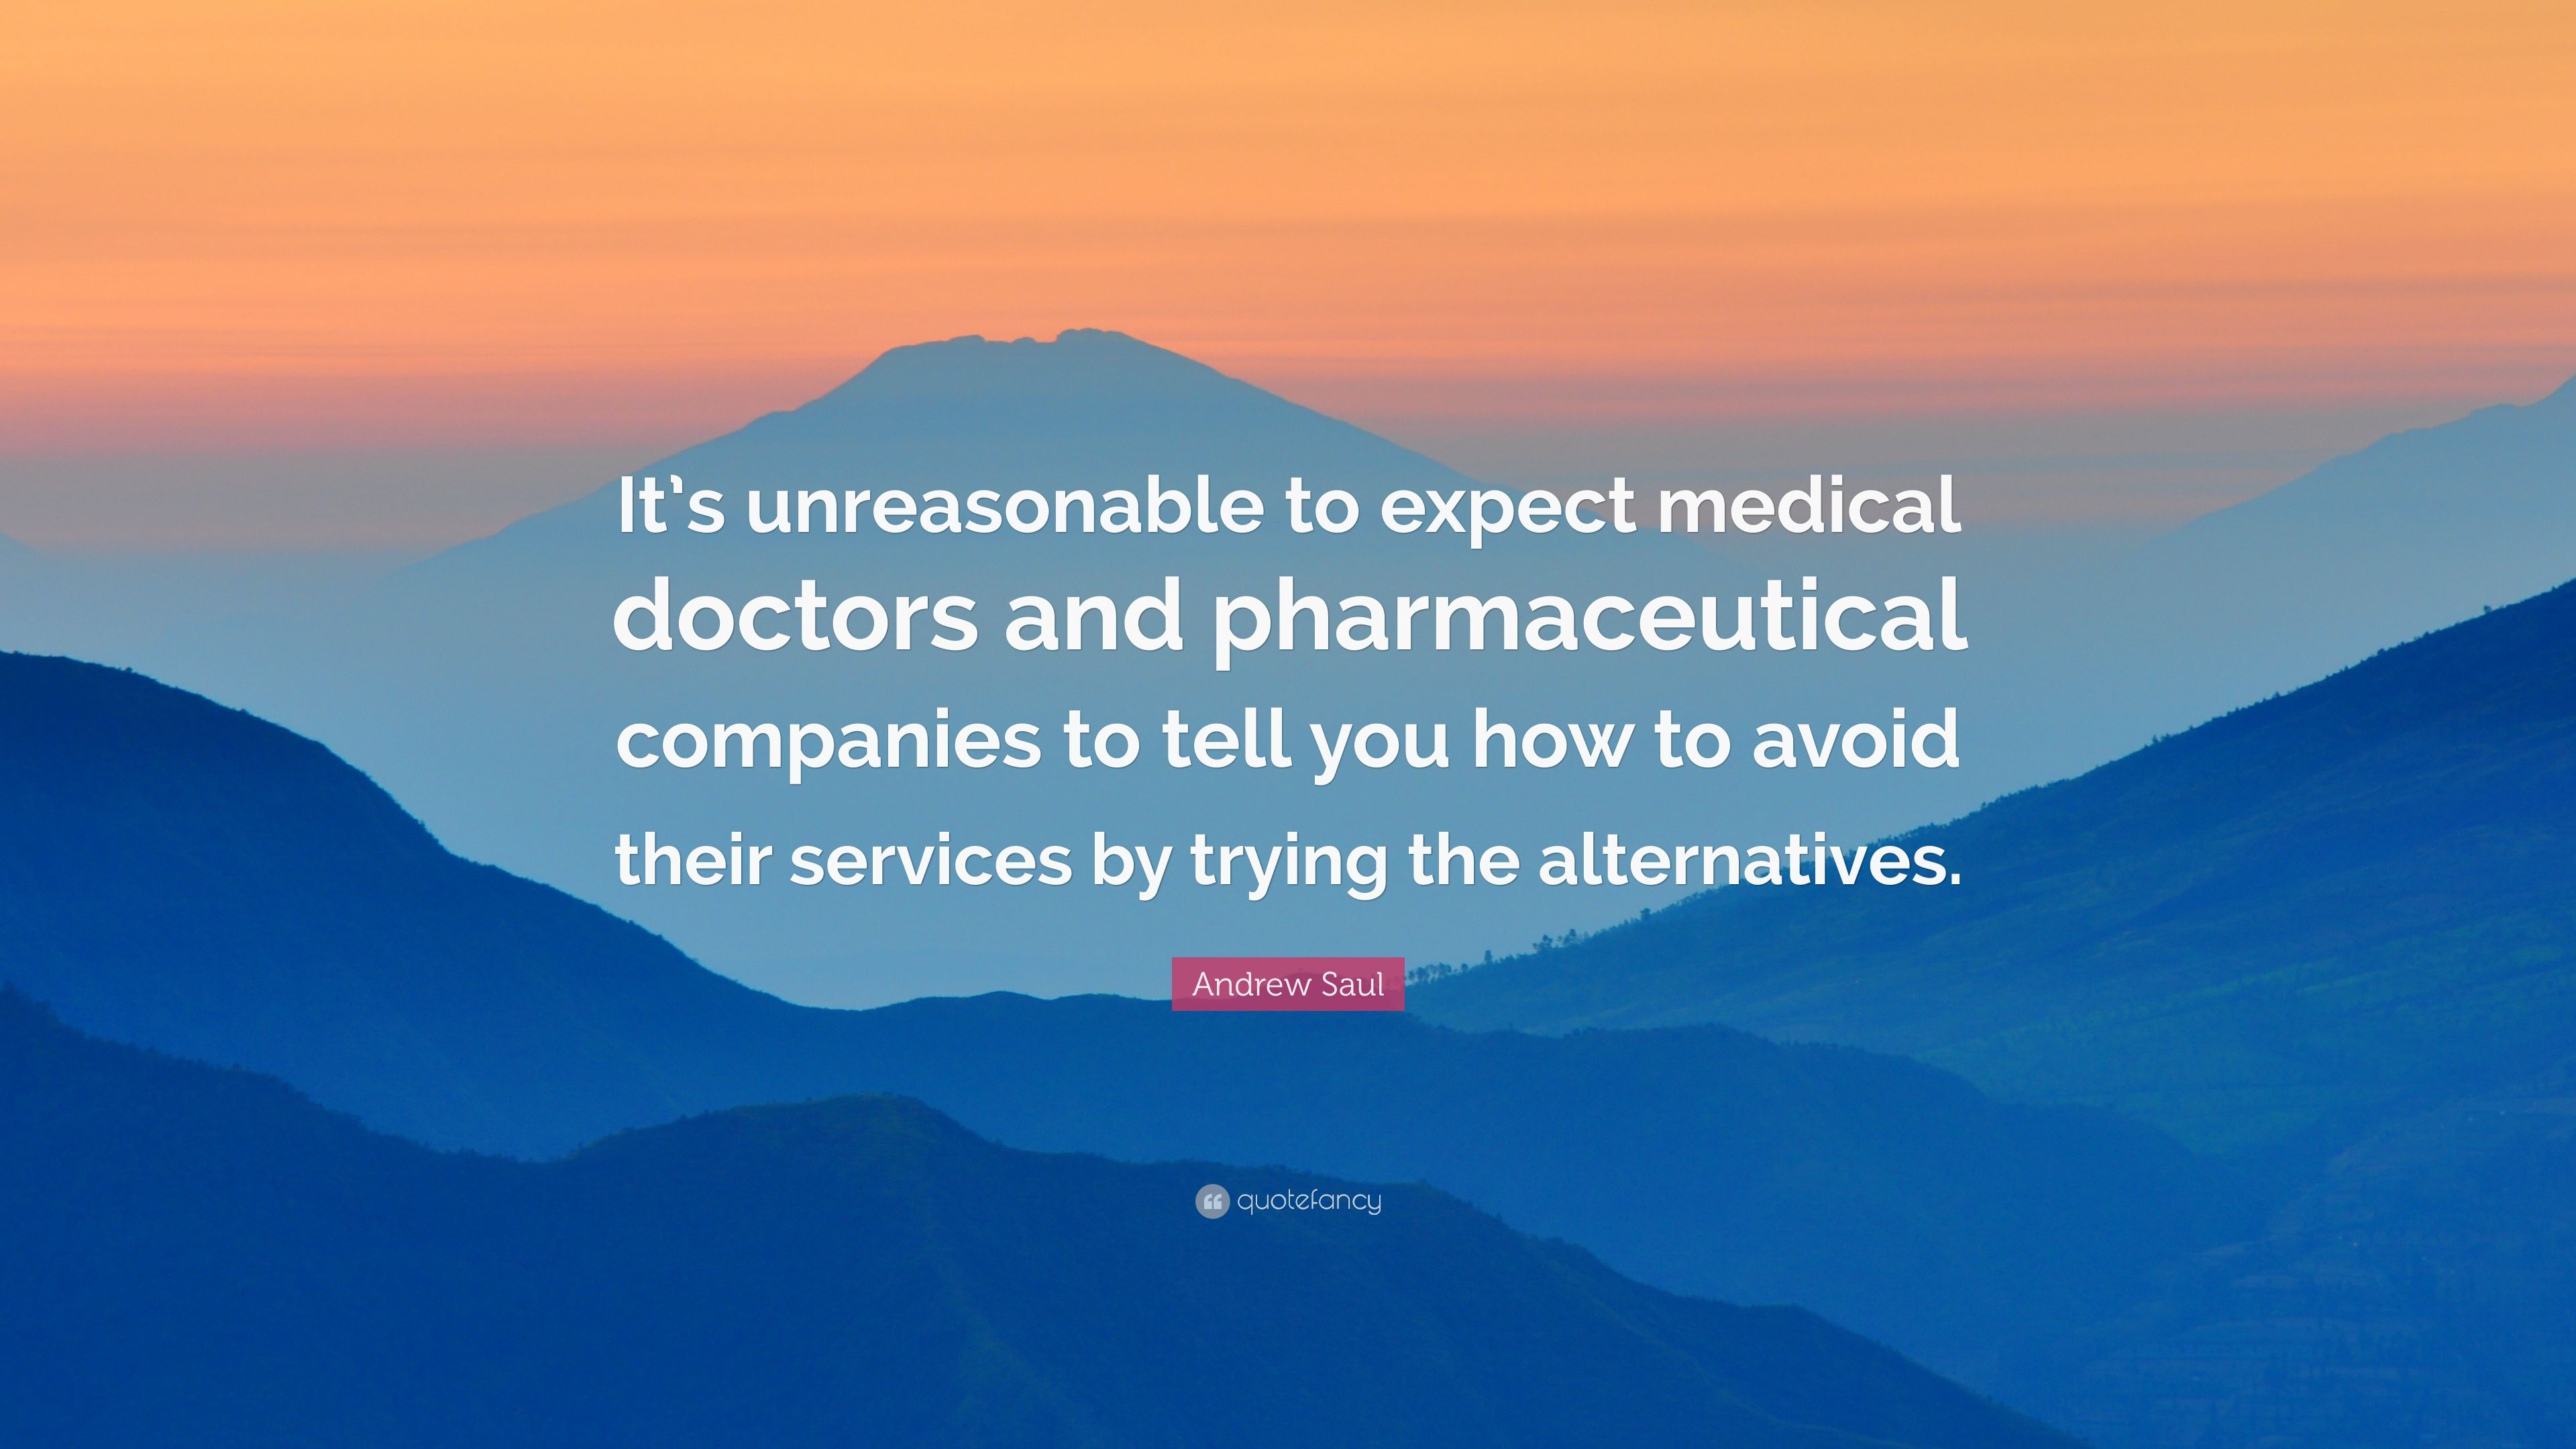 Andrew Saul Quote: “It's unreasonable to expect medical doctors and pharmaceutical companies to tell you how to avoid their services by tryi.” (10 wallpaper)